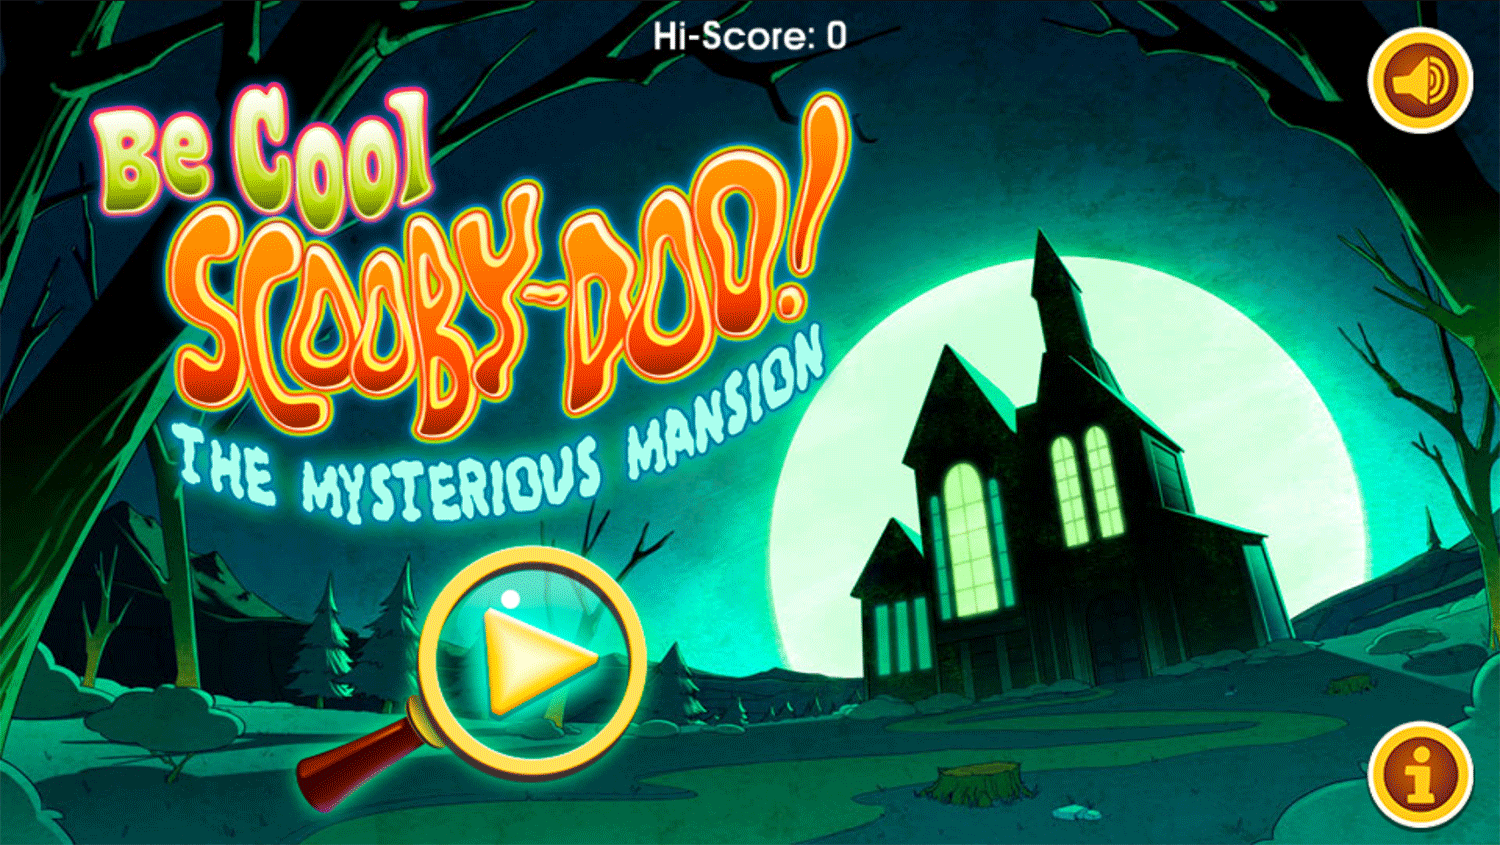 Be Cool Scooby Doo the Mysterious Mansion Welcome Screen Screenshot.